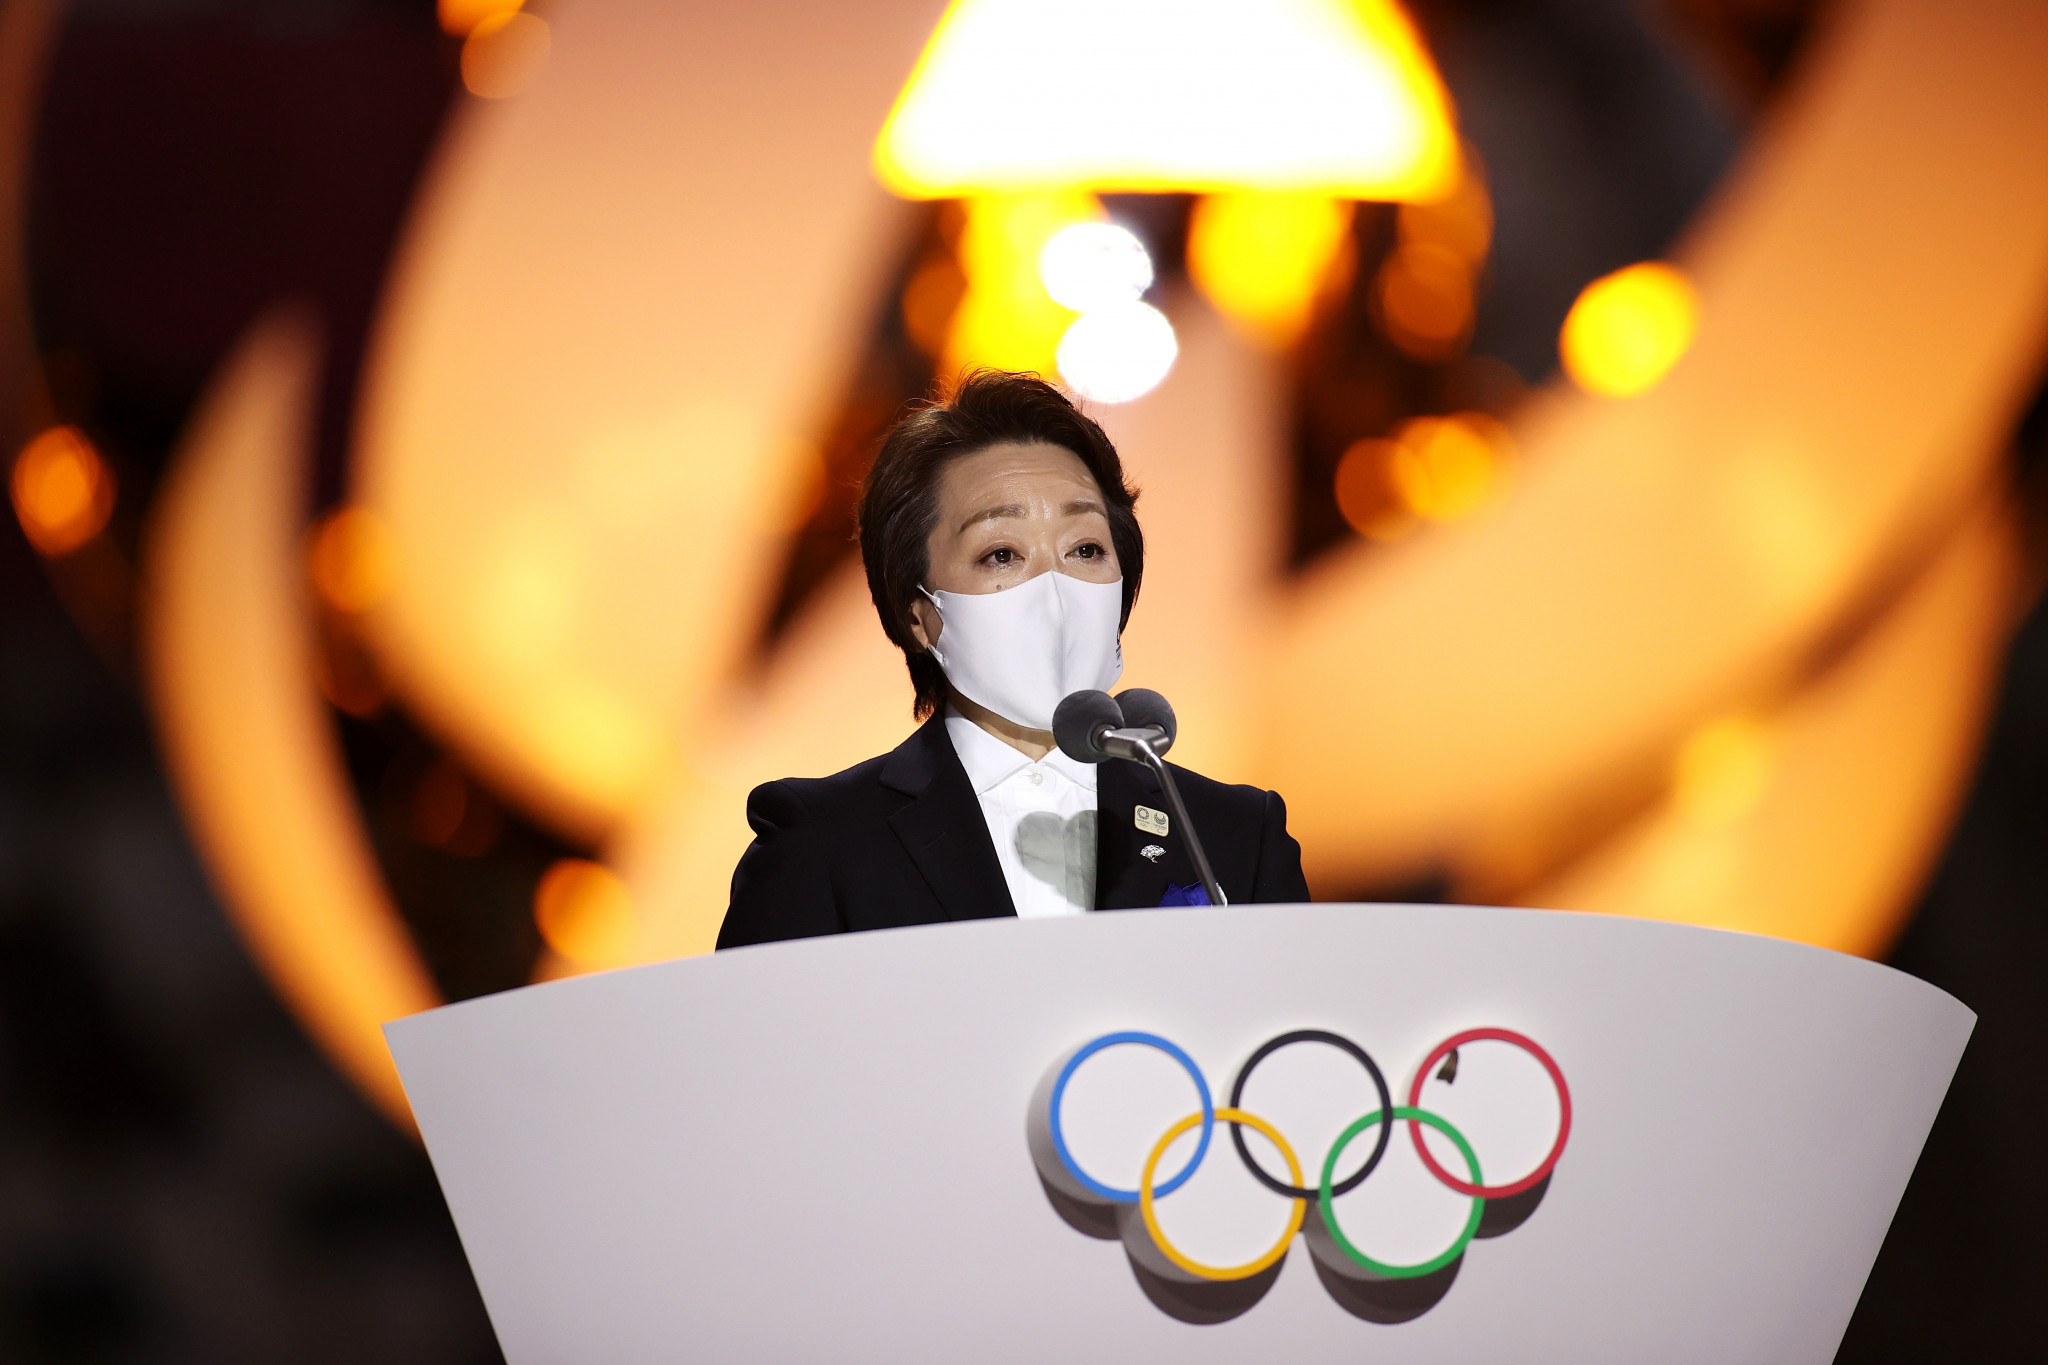 Tokyo 2020 President Seiko Hashimoto was among the dignitaries to speak during the Closing Ceremony ©Getty Images